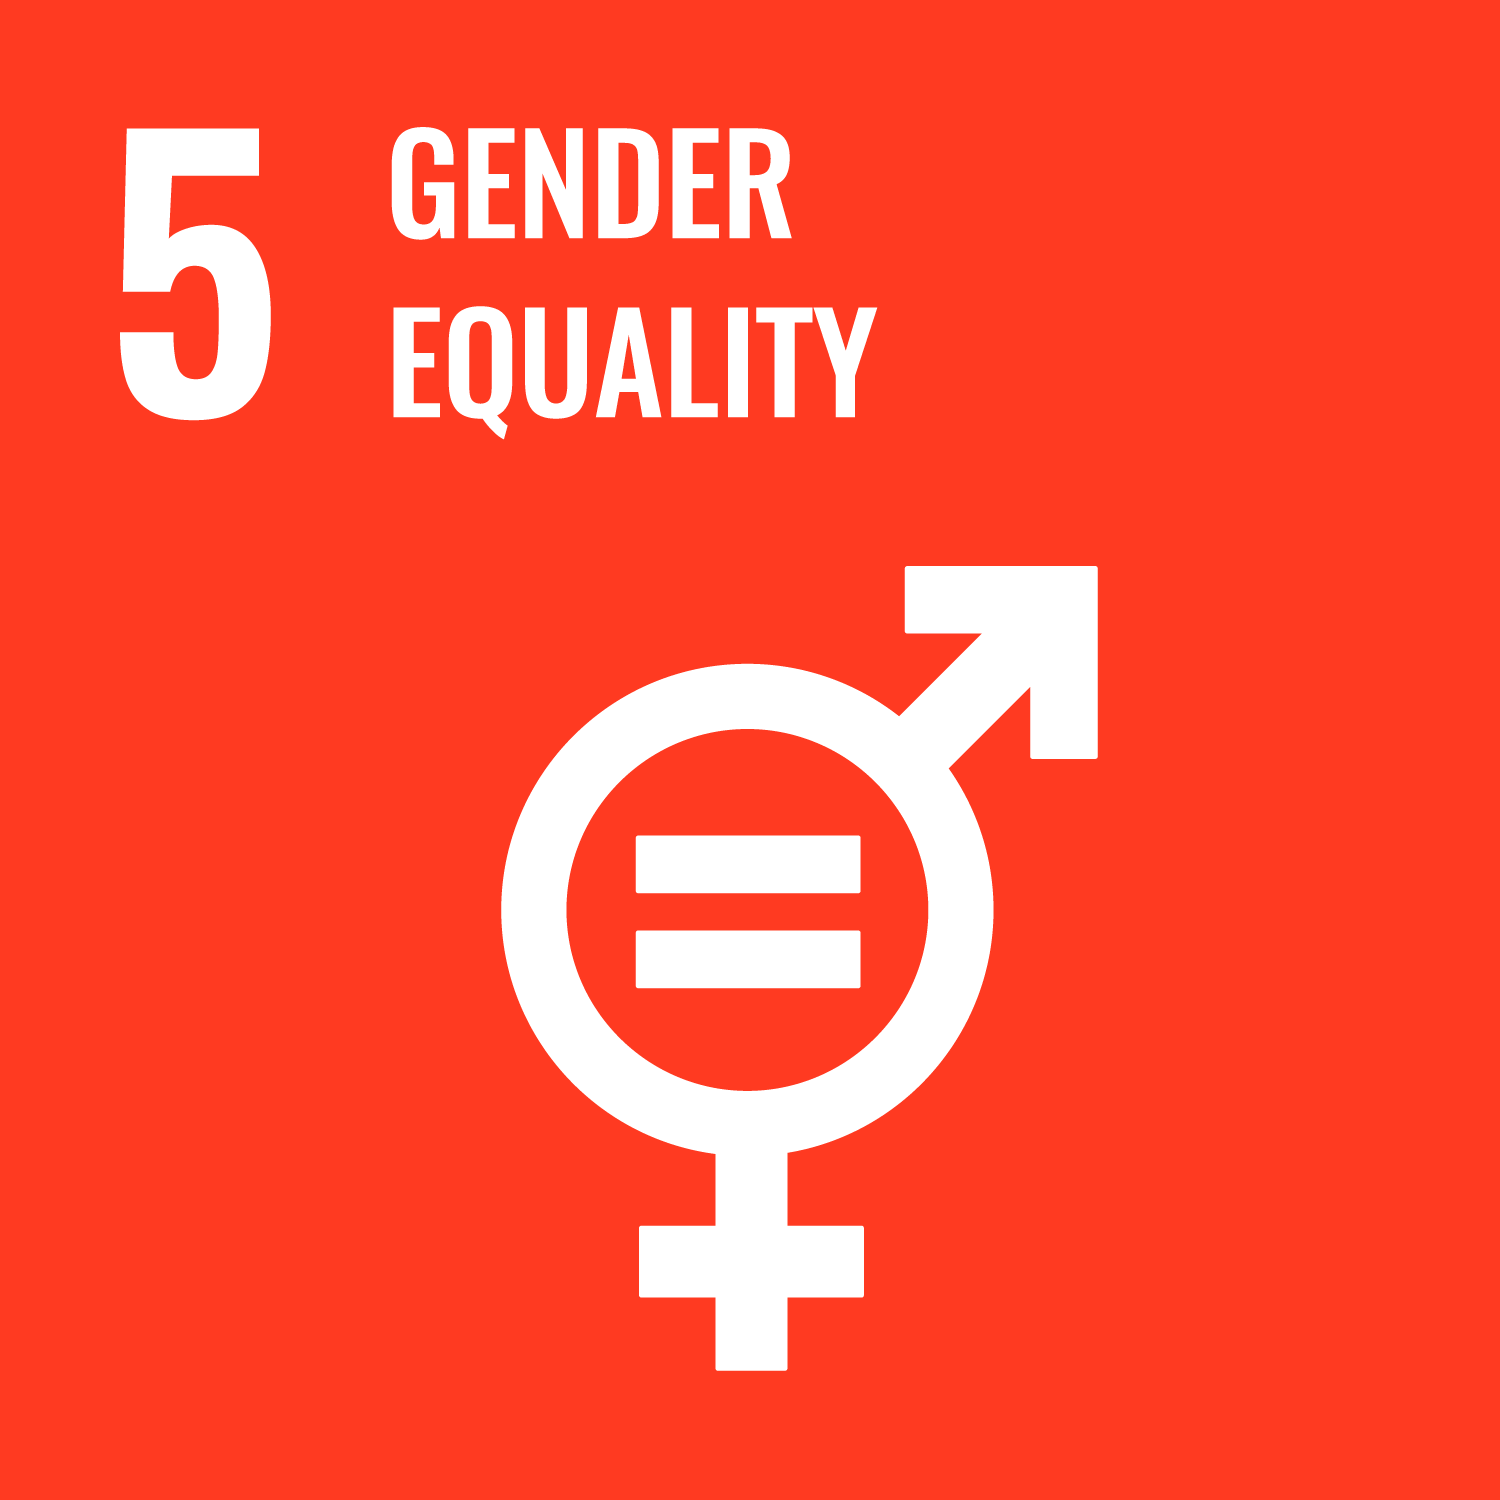 UN Women Fund for Gender Equality